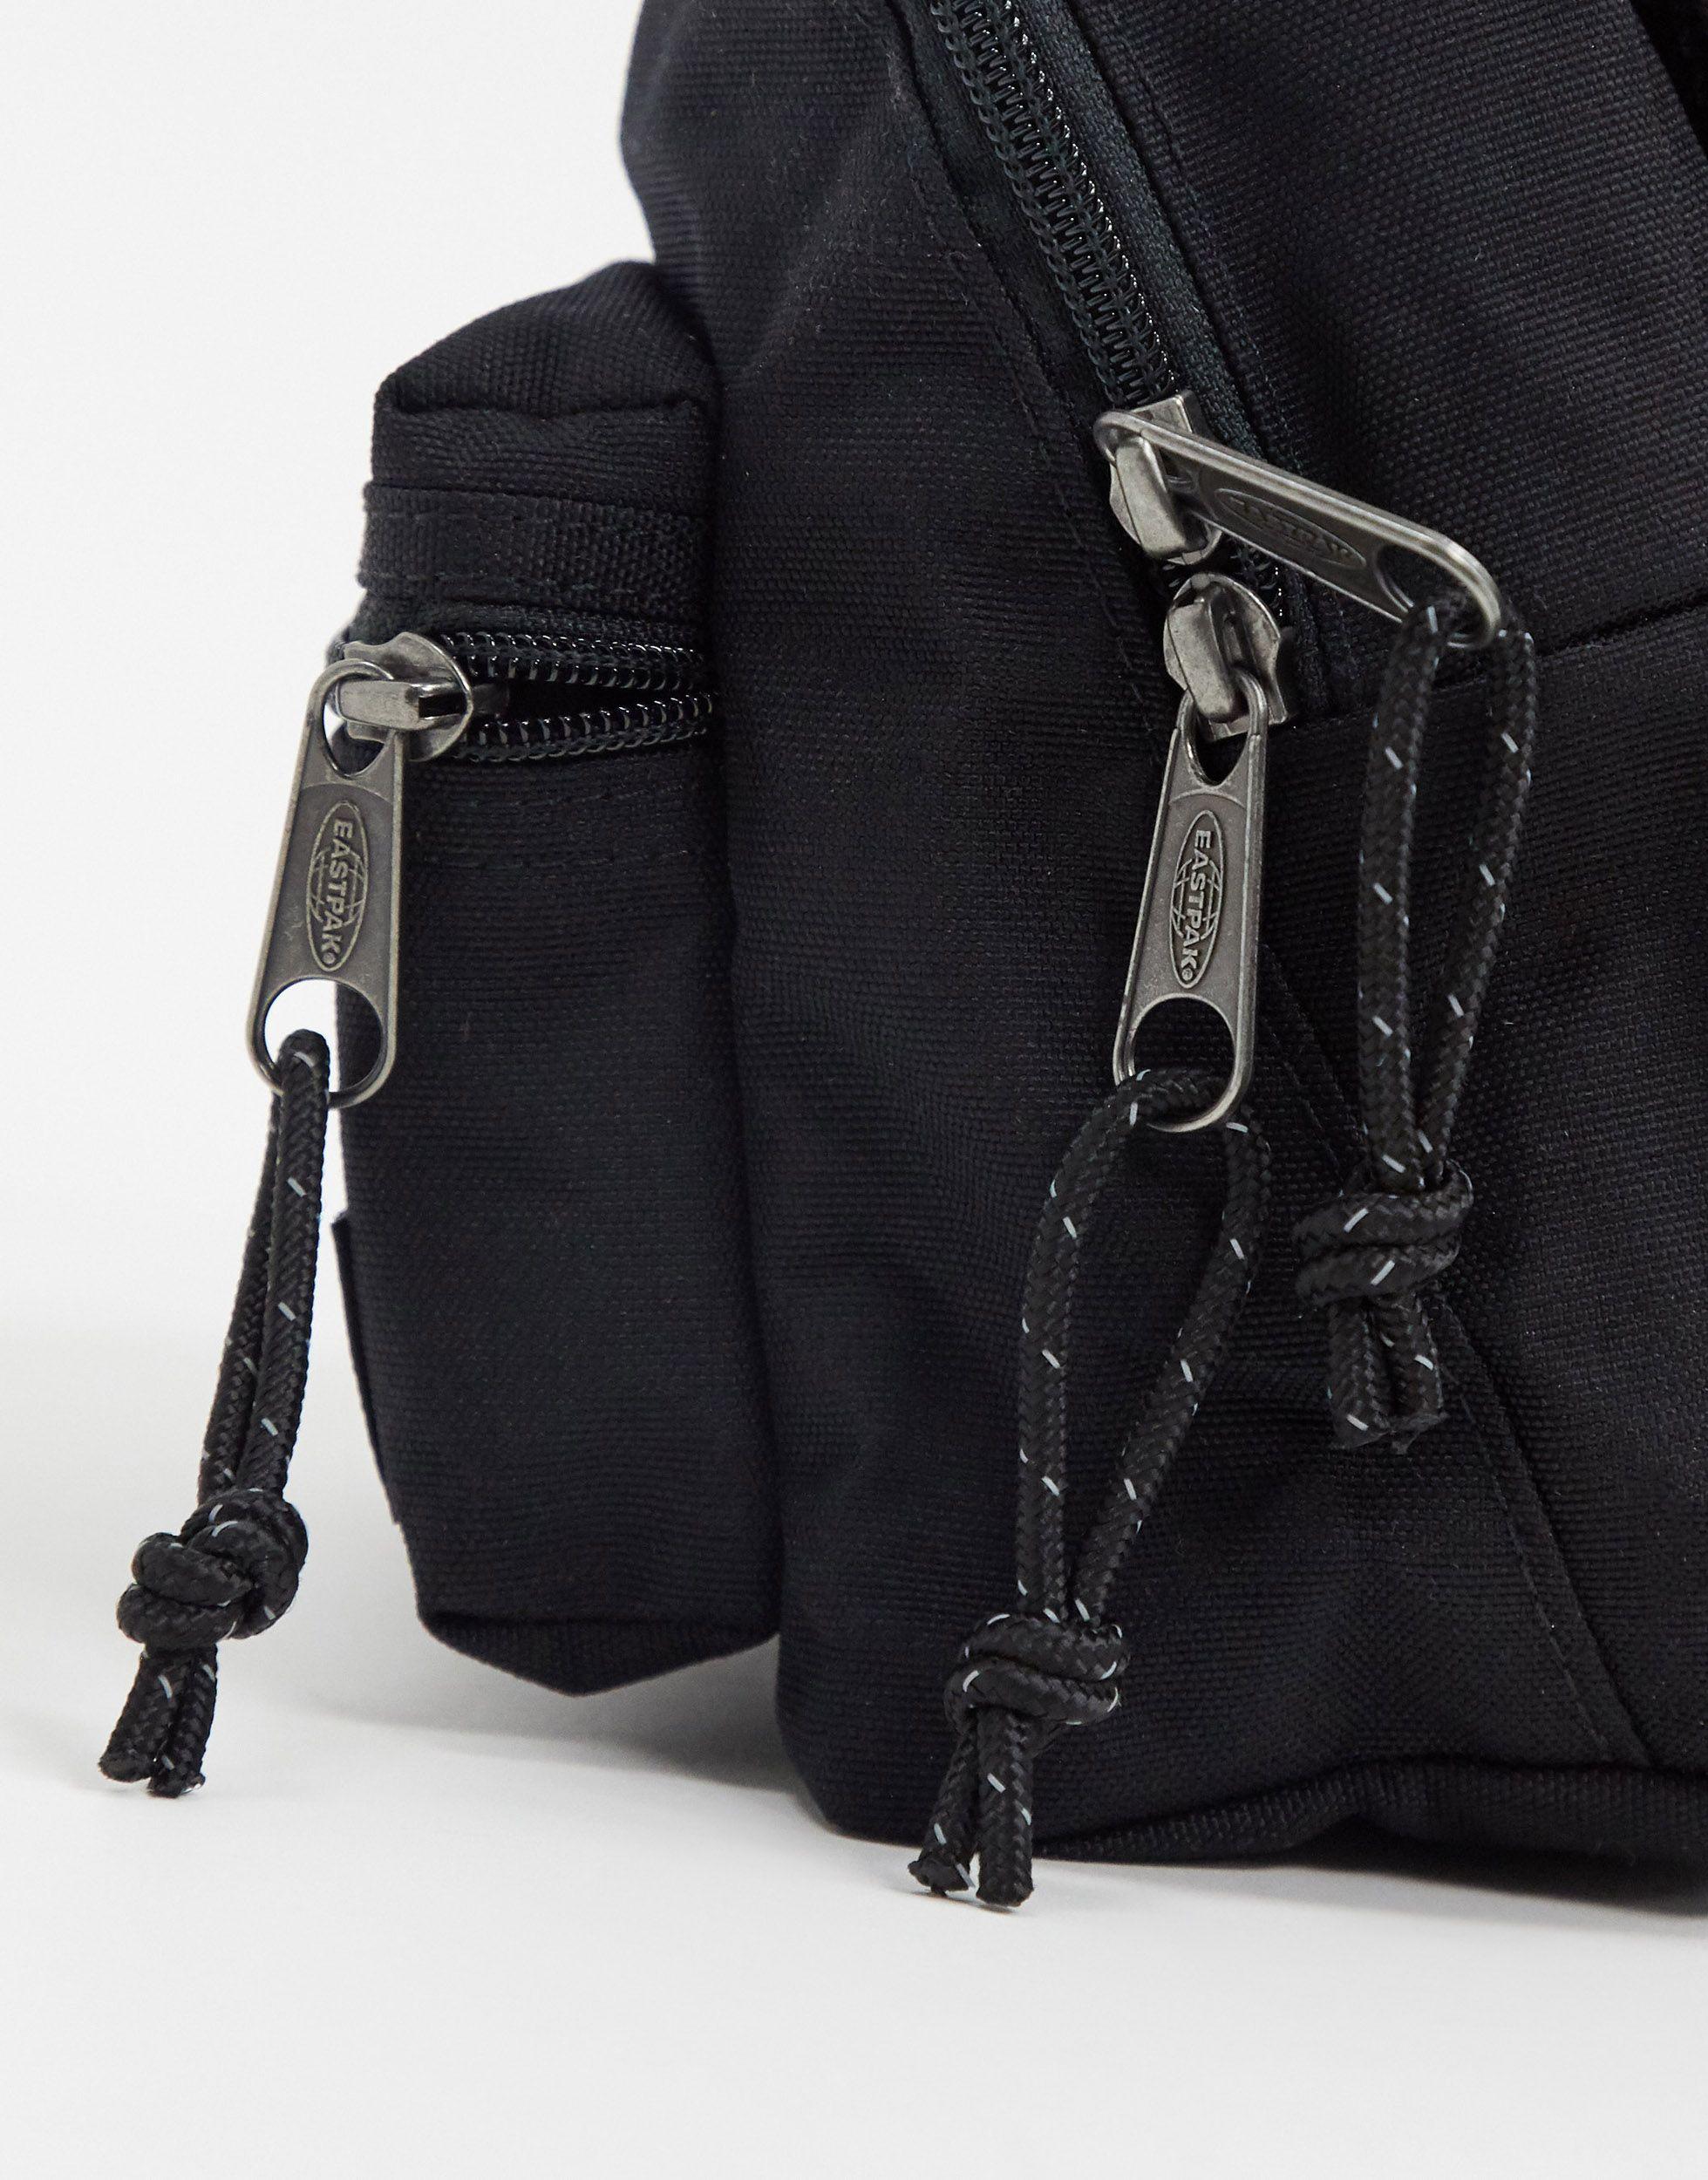 Eastpak Mini Backpack With Front Pouch in Black | Lyst